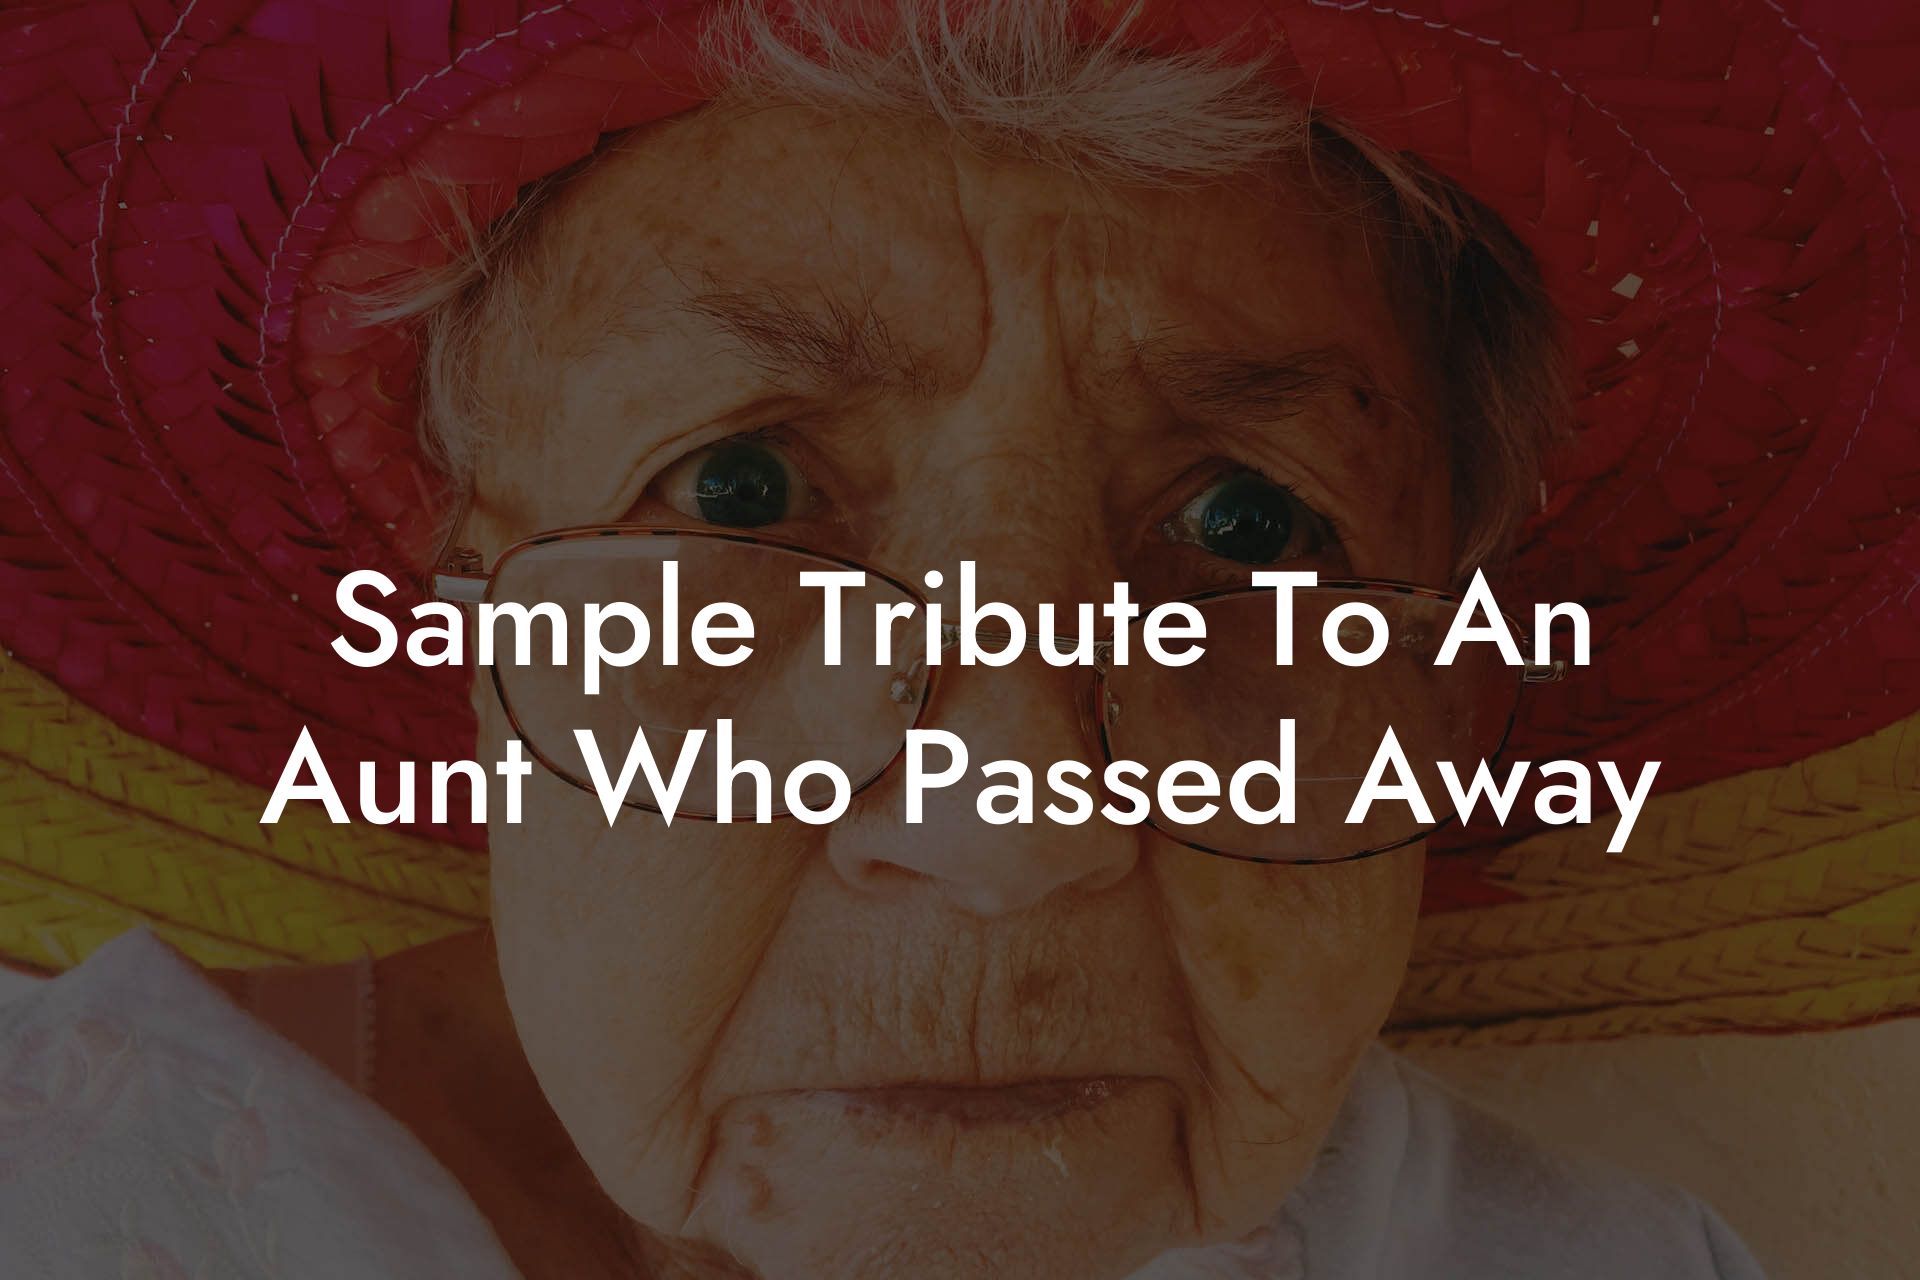 Sample Tribute To An Aunt Who Passed Away